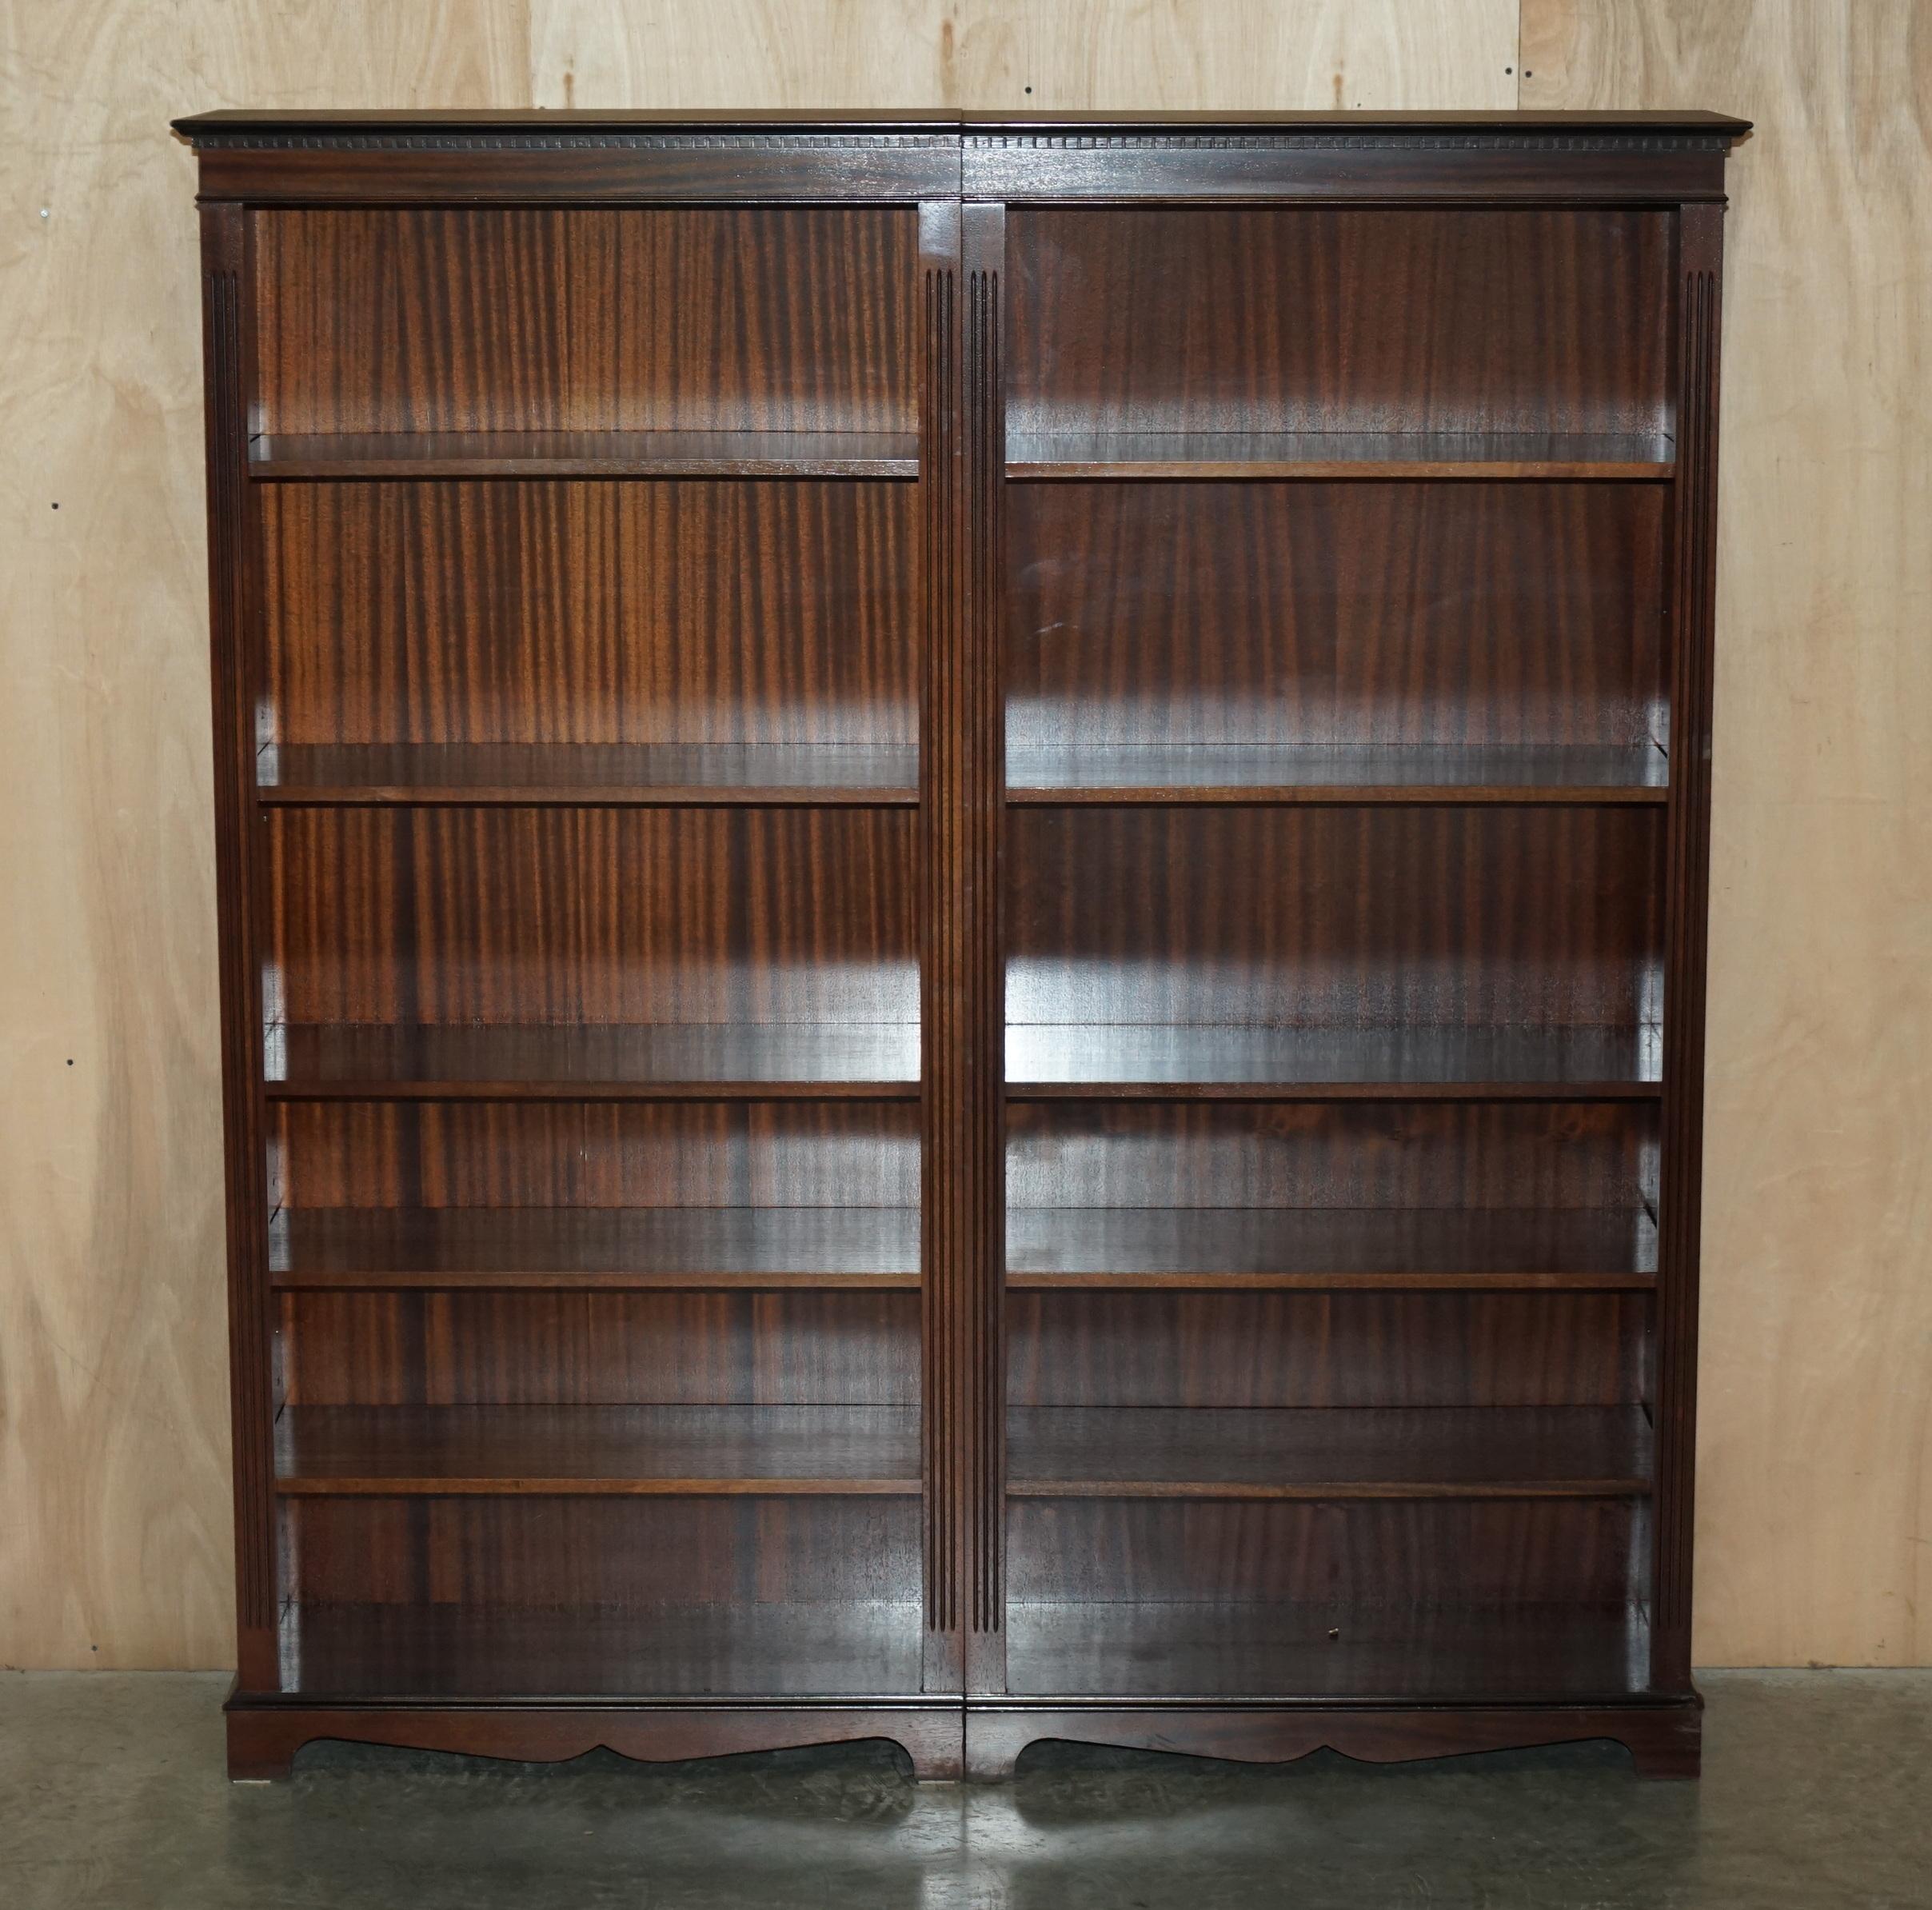 We are delighted to offer for this lovely large double bank vintage flamed mahogany finish Beresford and Hicks library bookcases

A very good looking well made and decorative piece, the shelves are a mix of two fixed and three height adjustable,